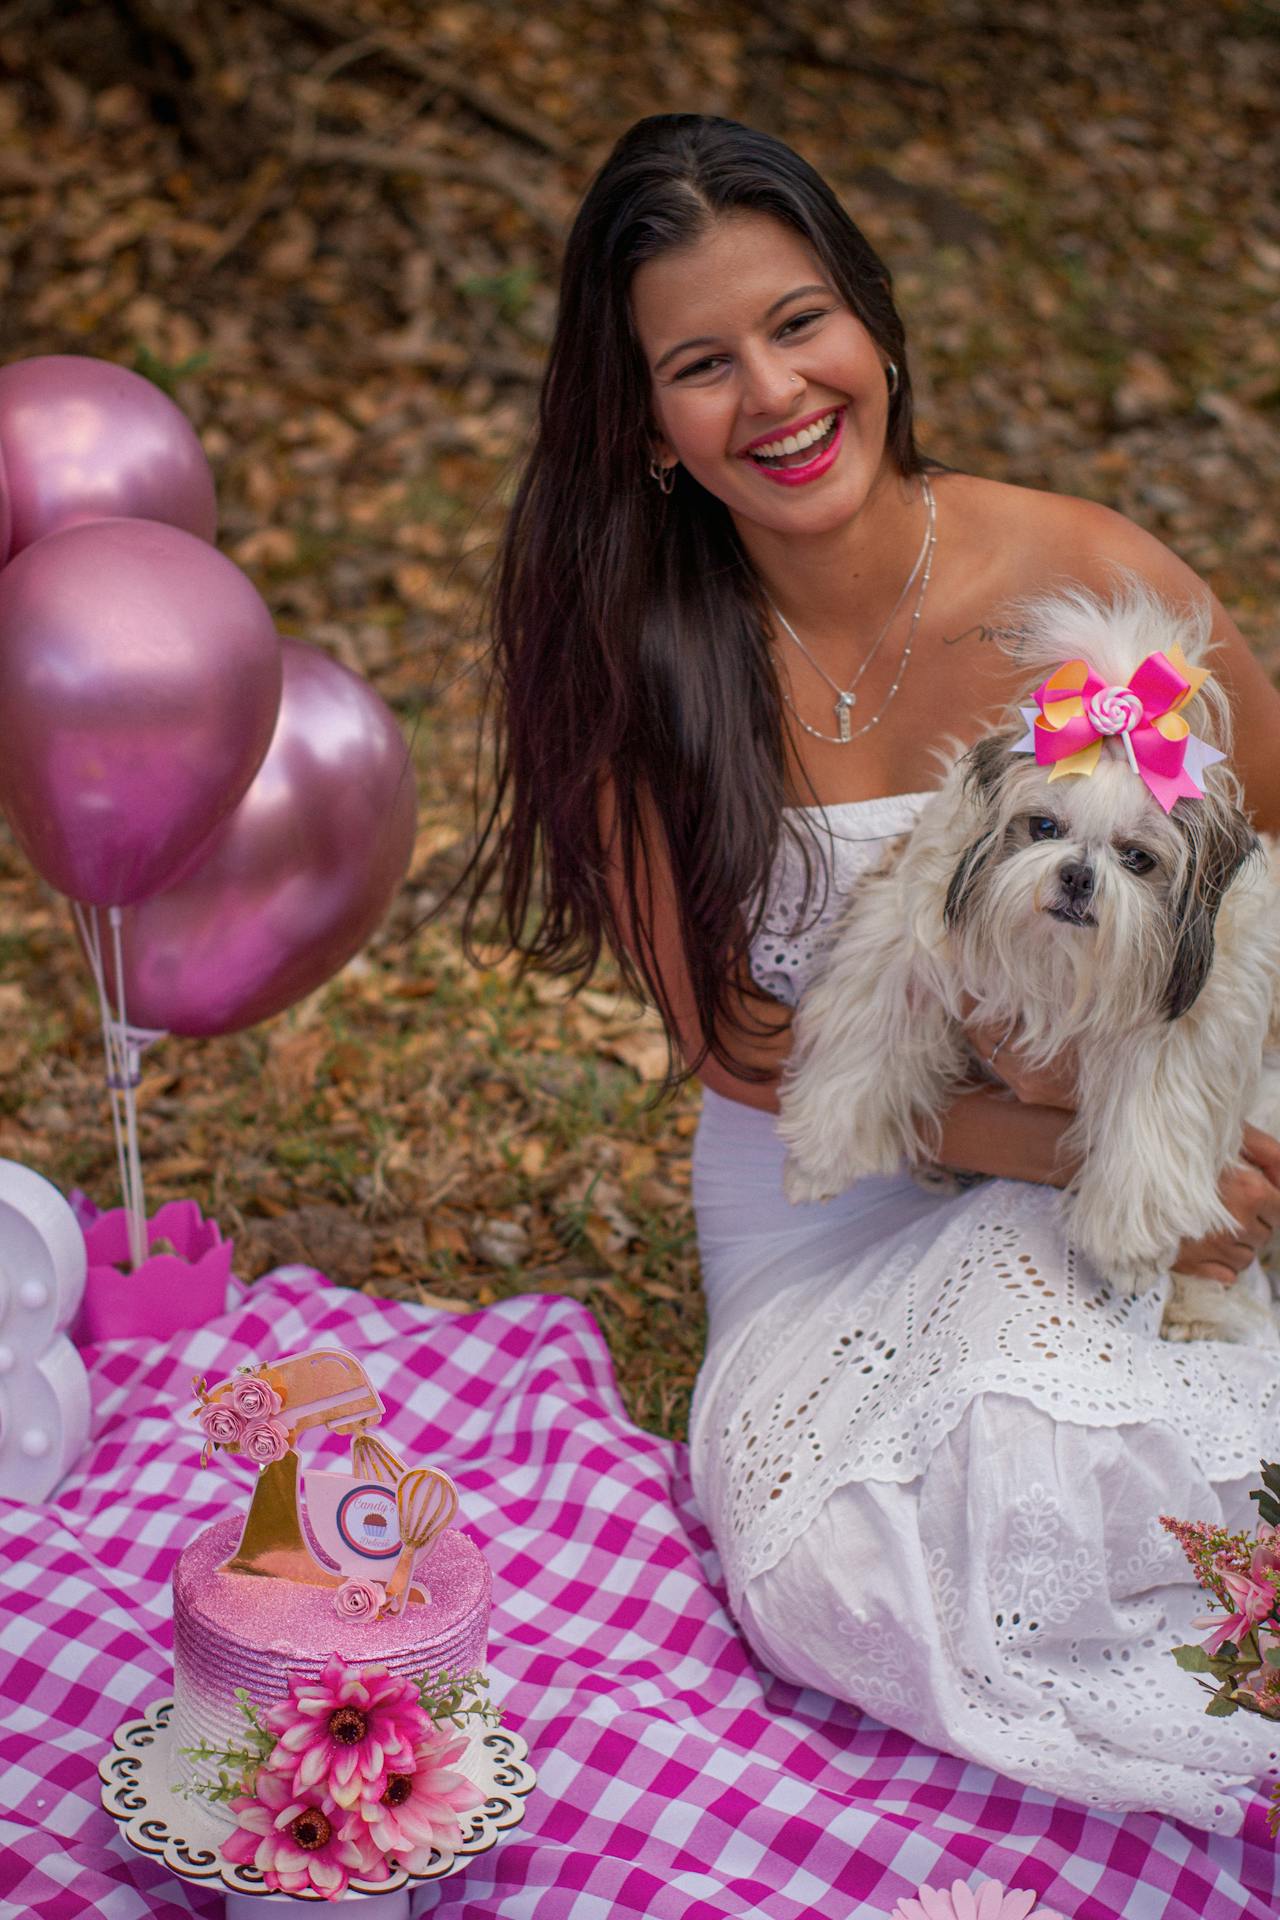 A woman with a dog sitting on a picnic blanket with balloons.